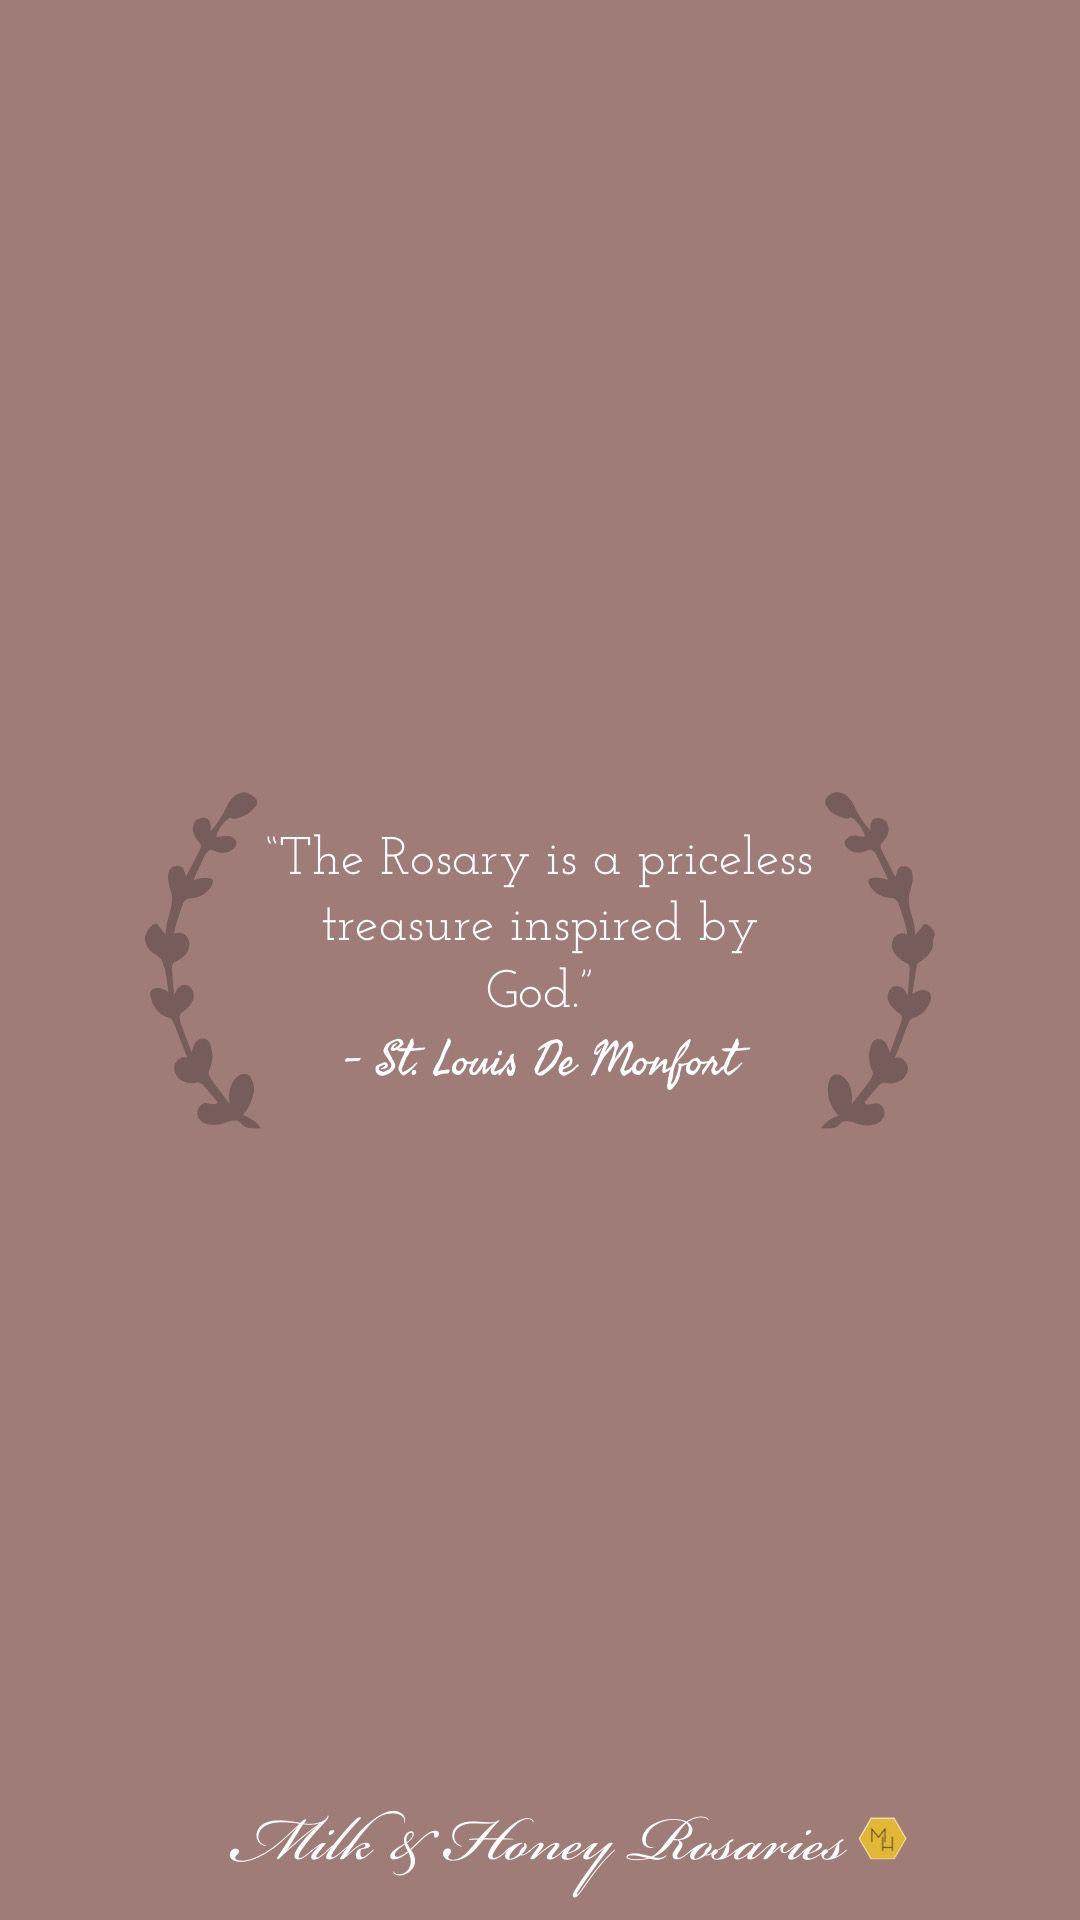 The Rosary is a priceless treasure inspired by God.” -St. Louis De